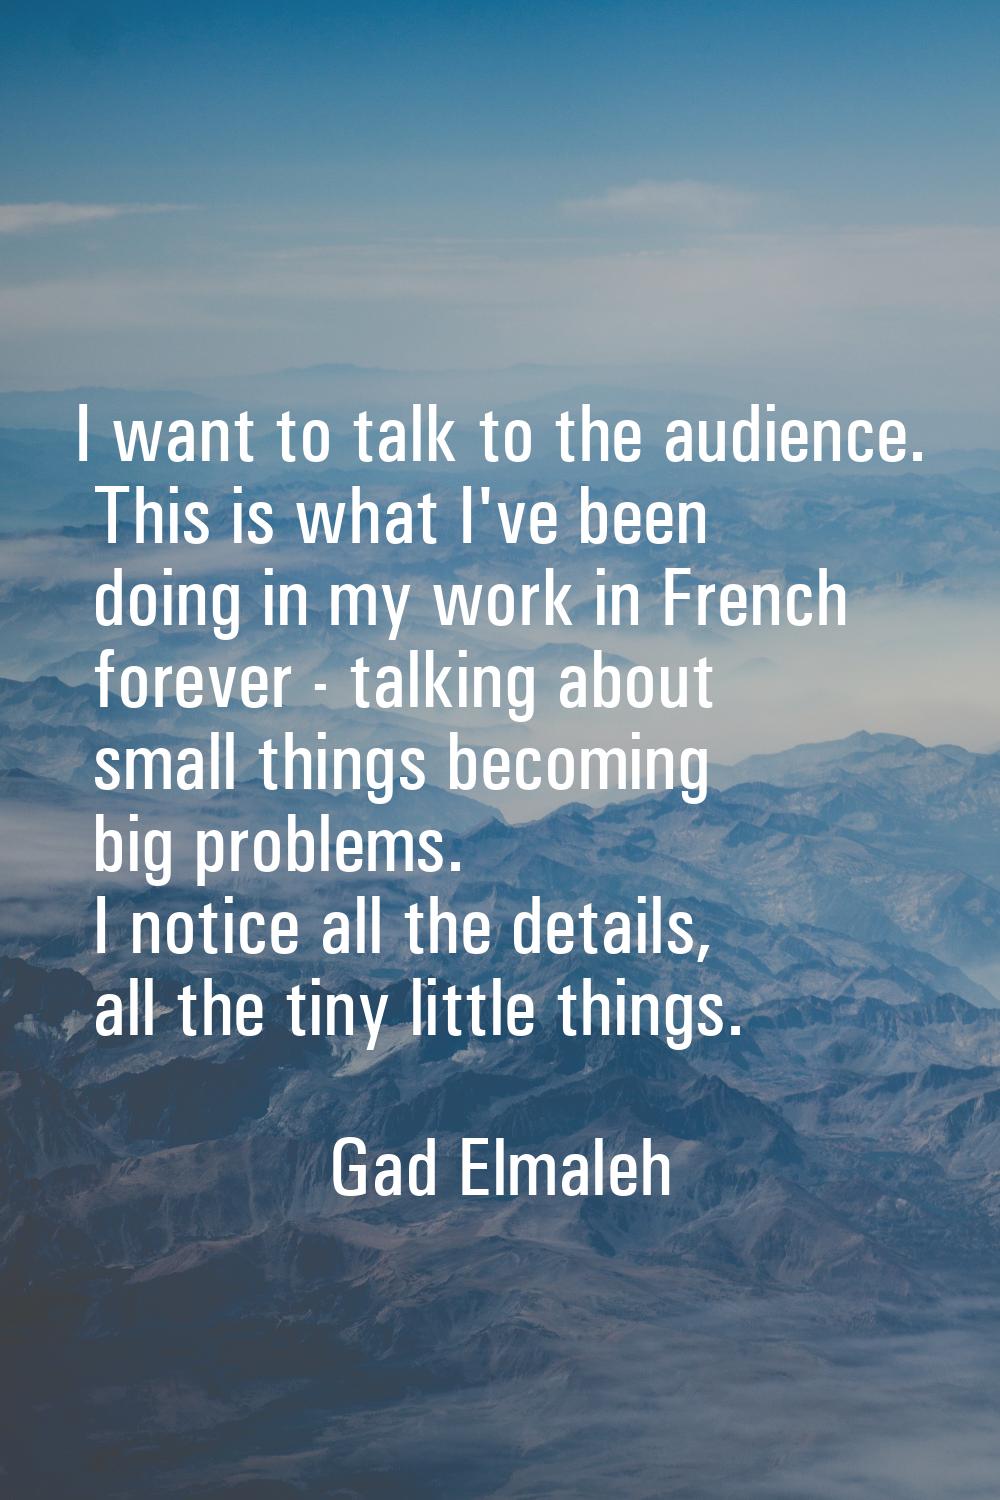 I want to talk to the audience. This is what I've been doing in my work in French forever - talking